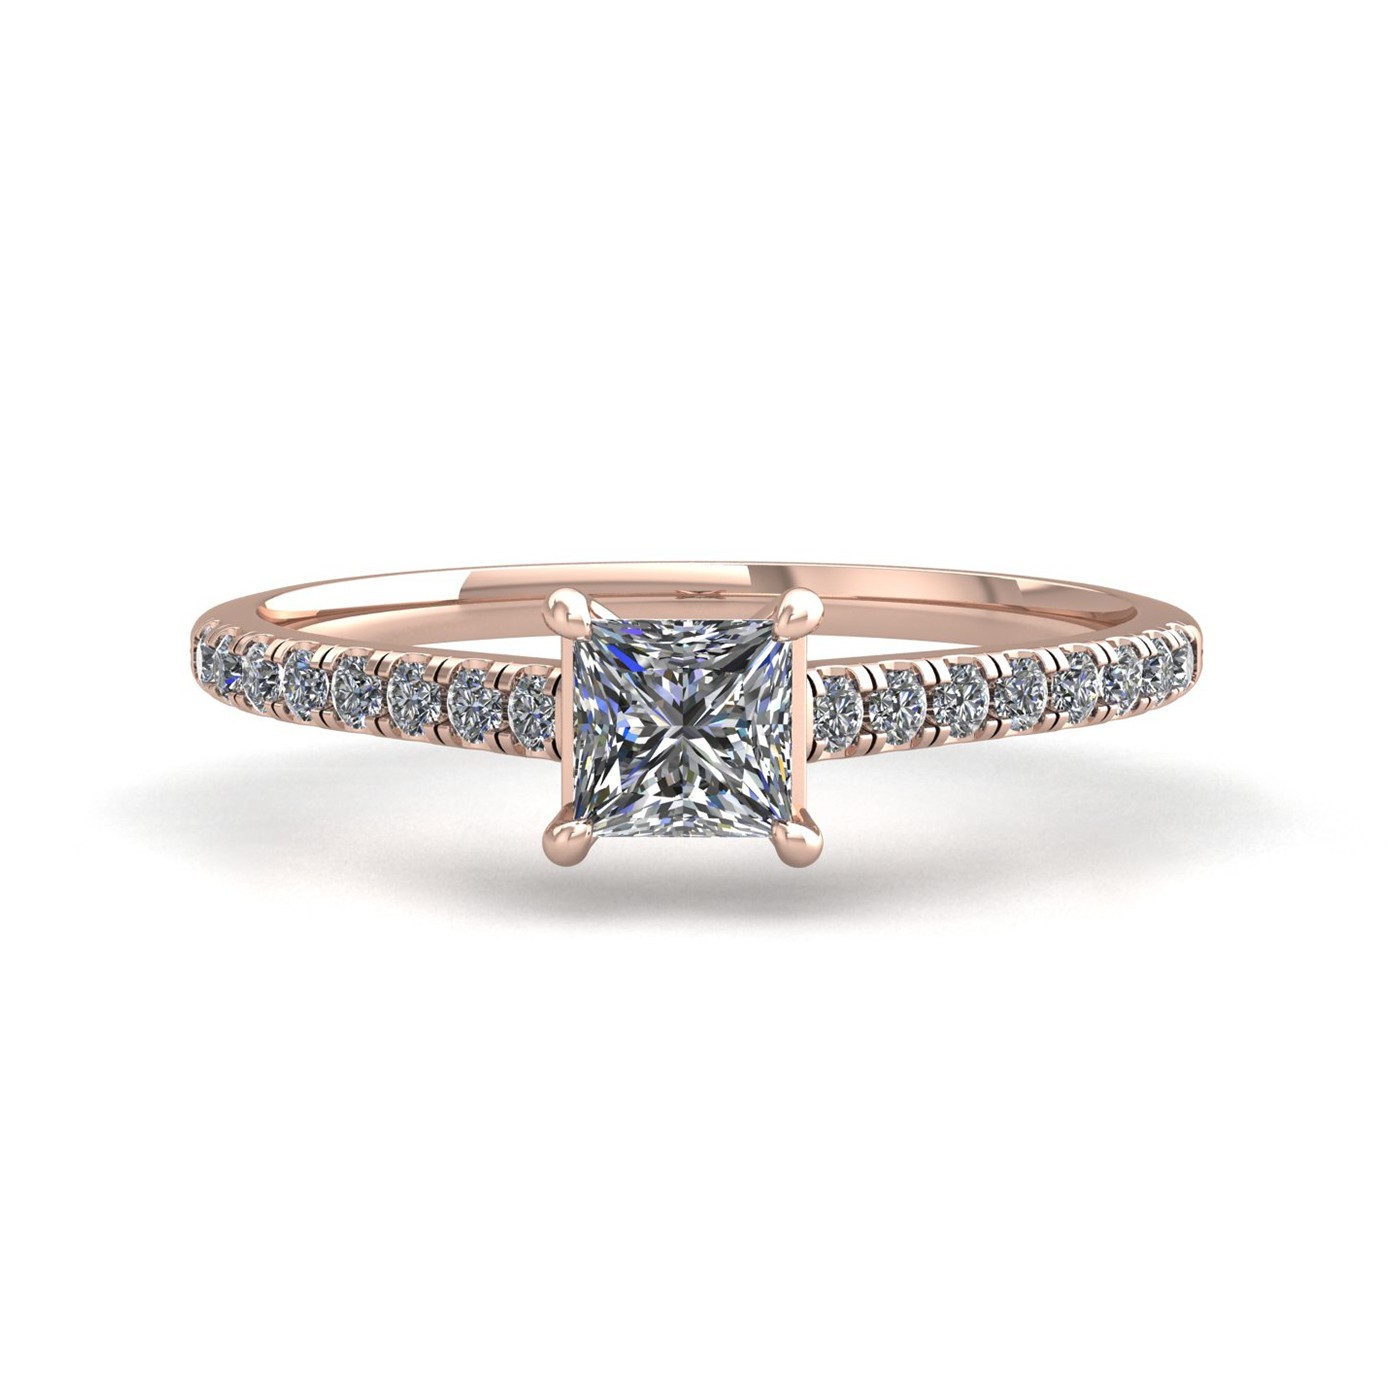 18k rose gold 2,00 ct 4 prongs princess cut diamond engagement ring with whisper thin pavÉ set band Photos & images